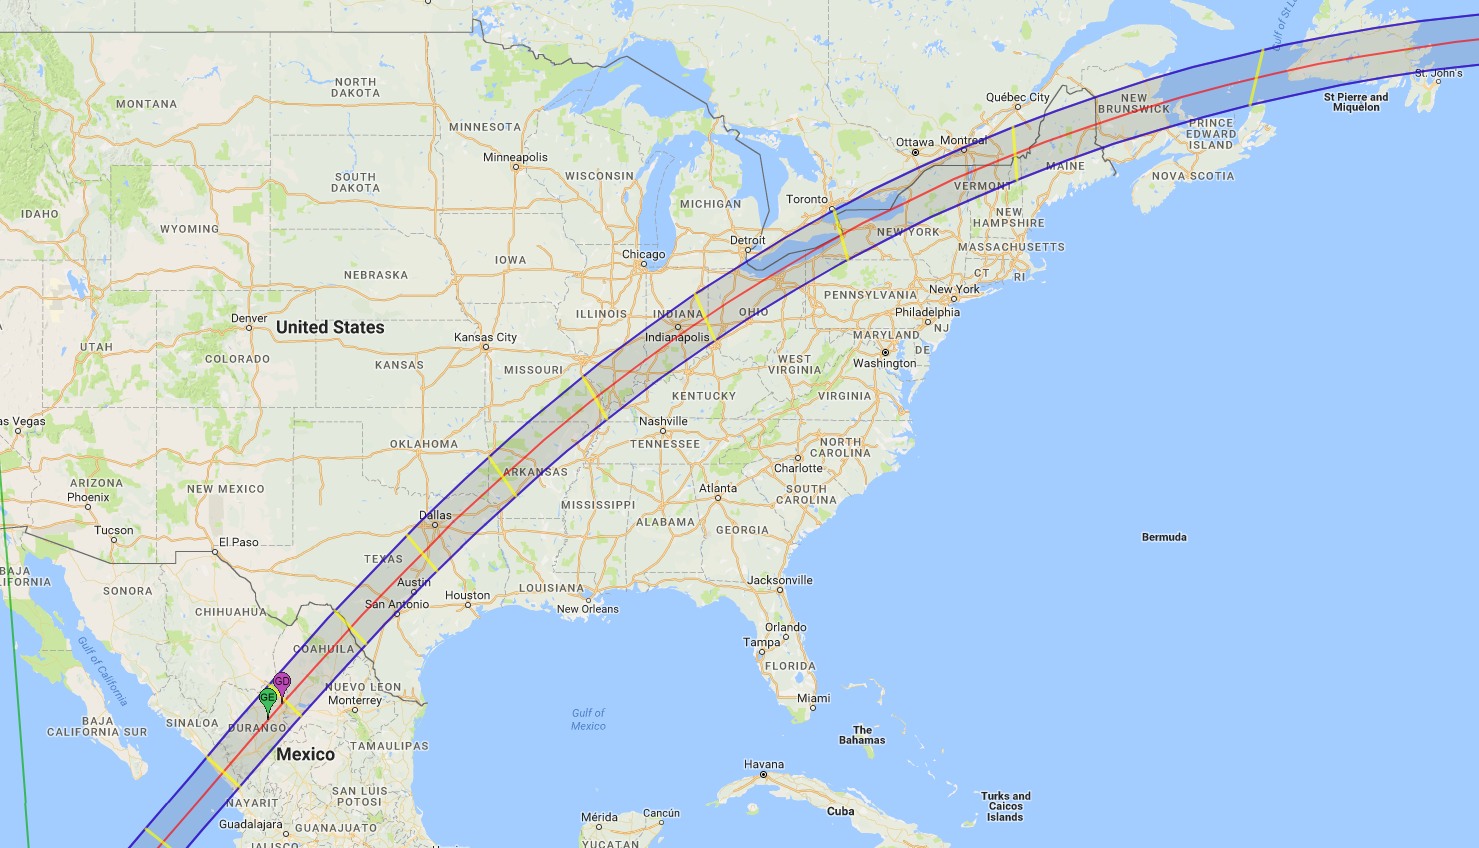 Solar Eclipse 2024 Path Of Totality : MAP: 2024 total solar eclipse